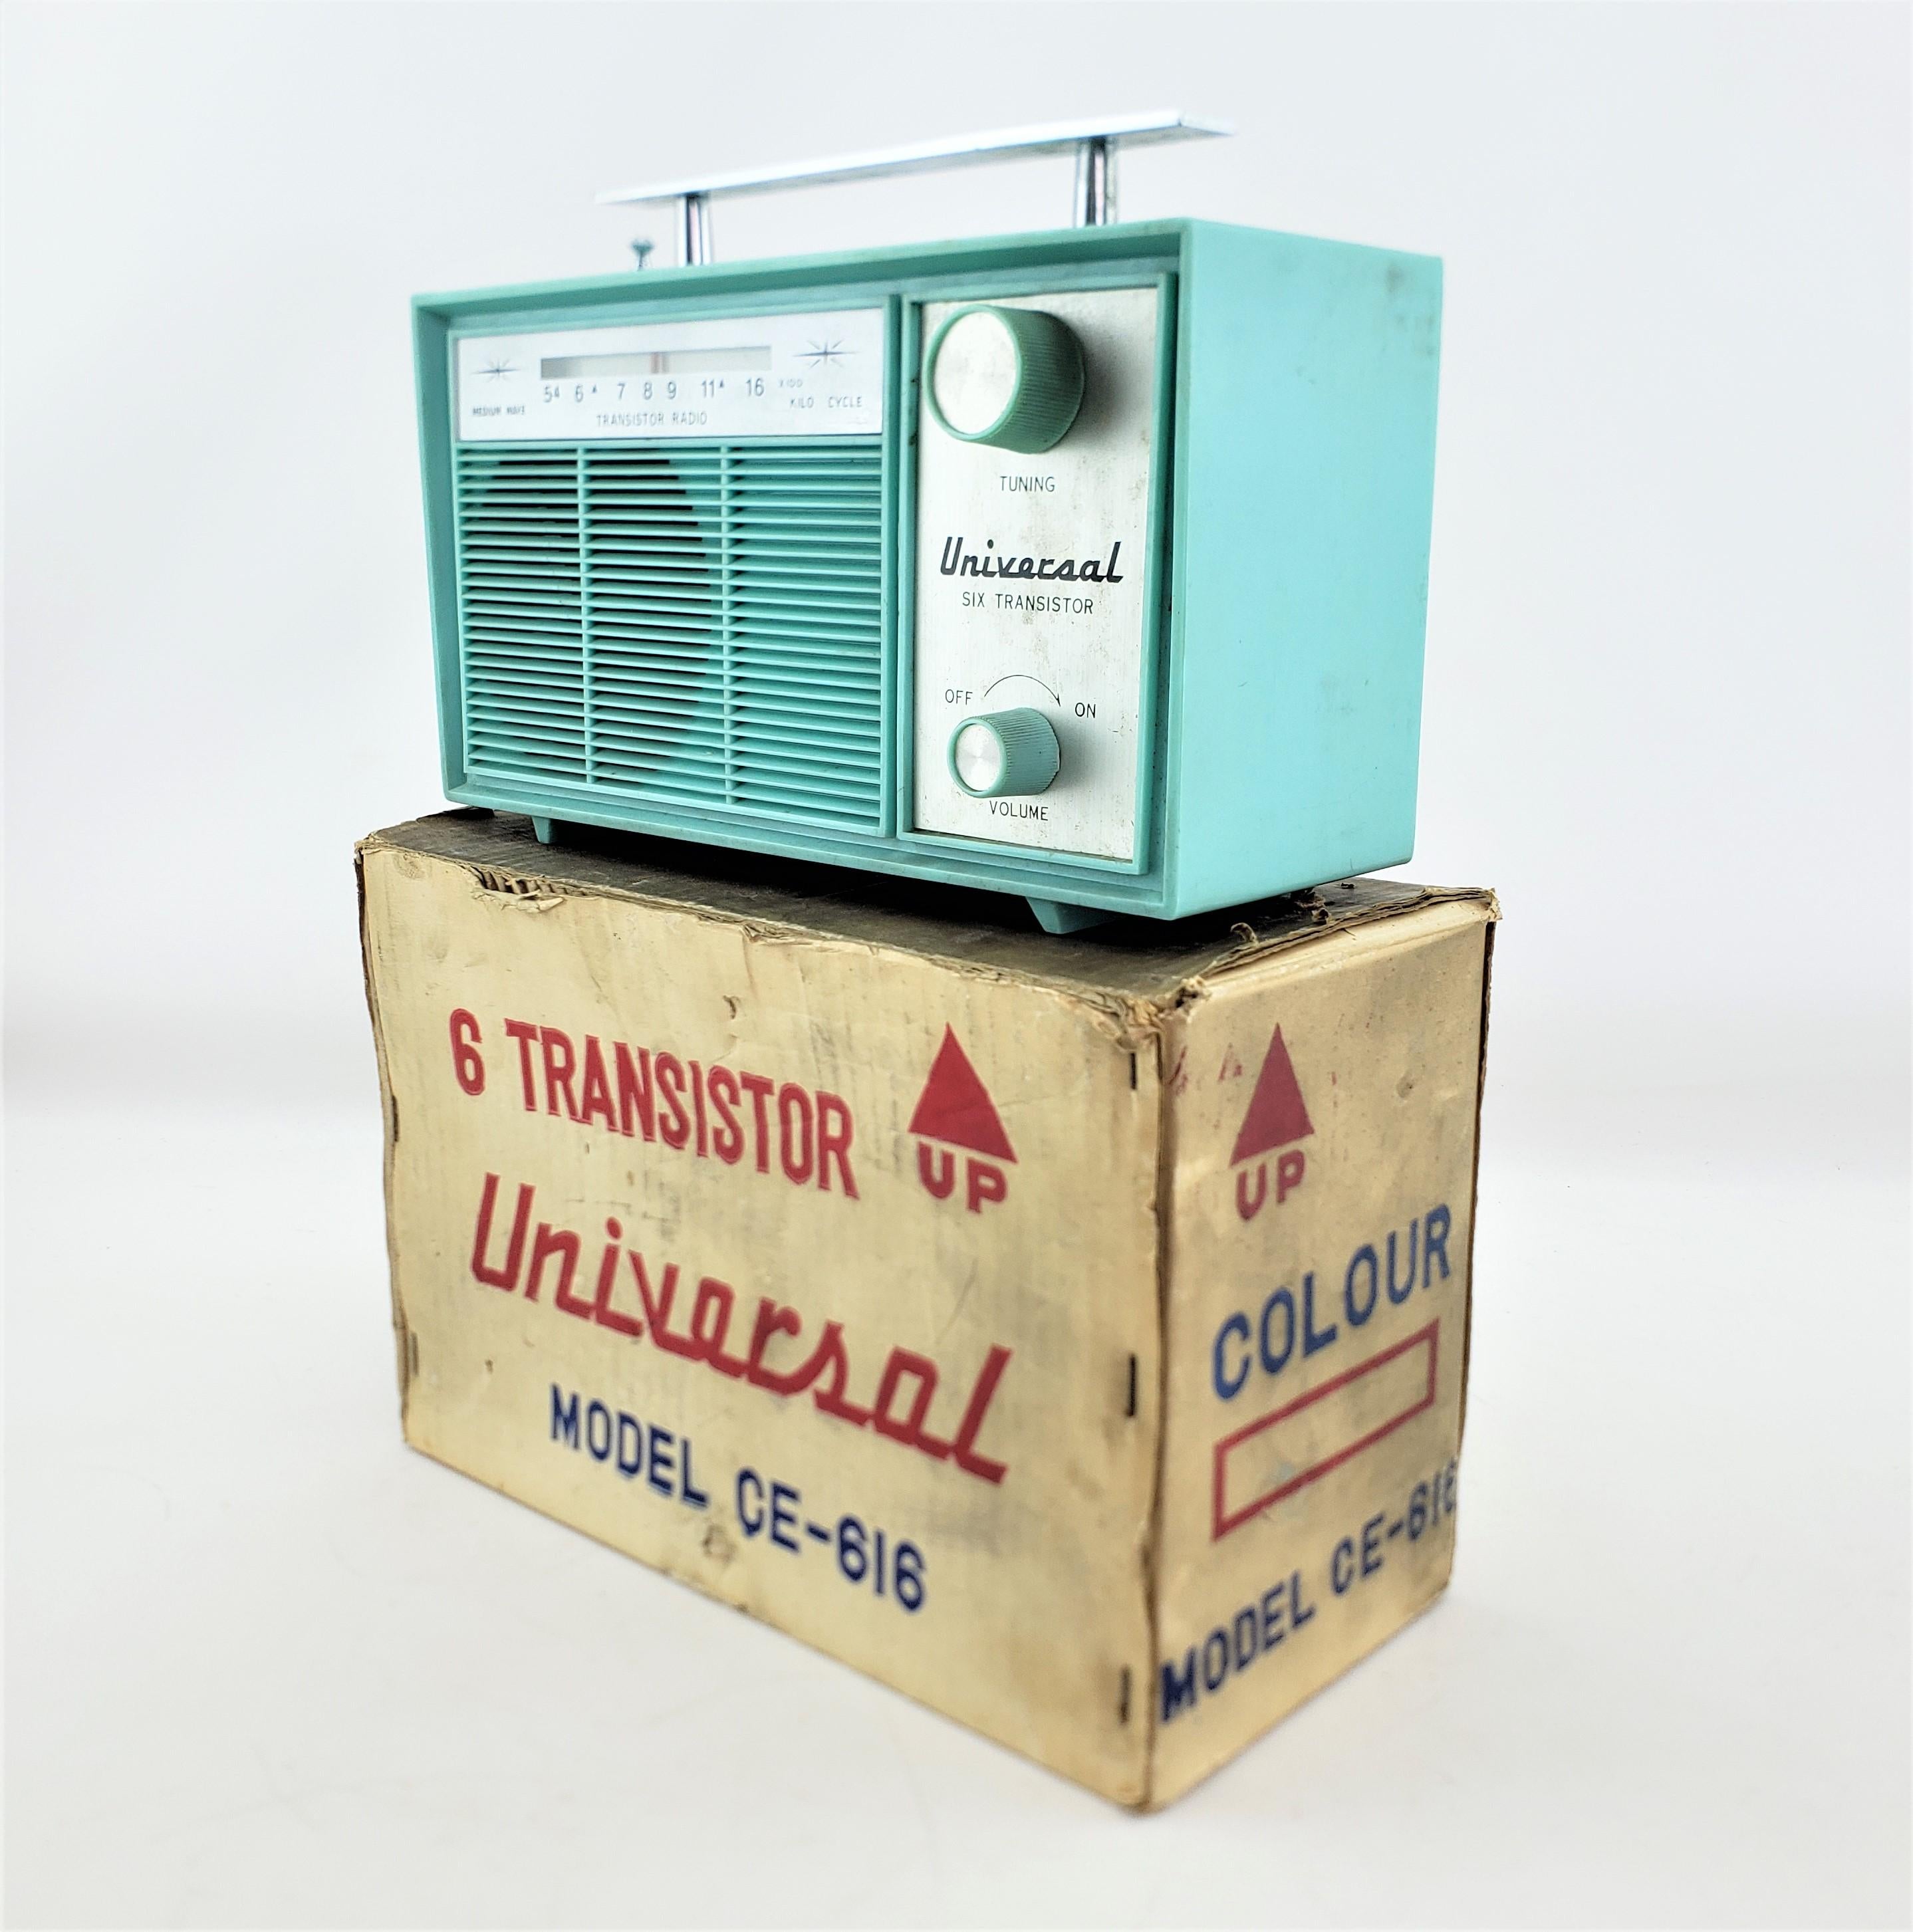 This radio was made by Universal of Canada and dates to approximately 1965 and done in the period Mid-Century Modern style. This radio is a six transistor AM band portable radio done with a turquoise plastic molded case and comes complete with its